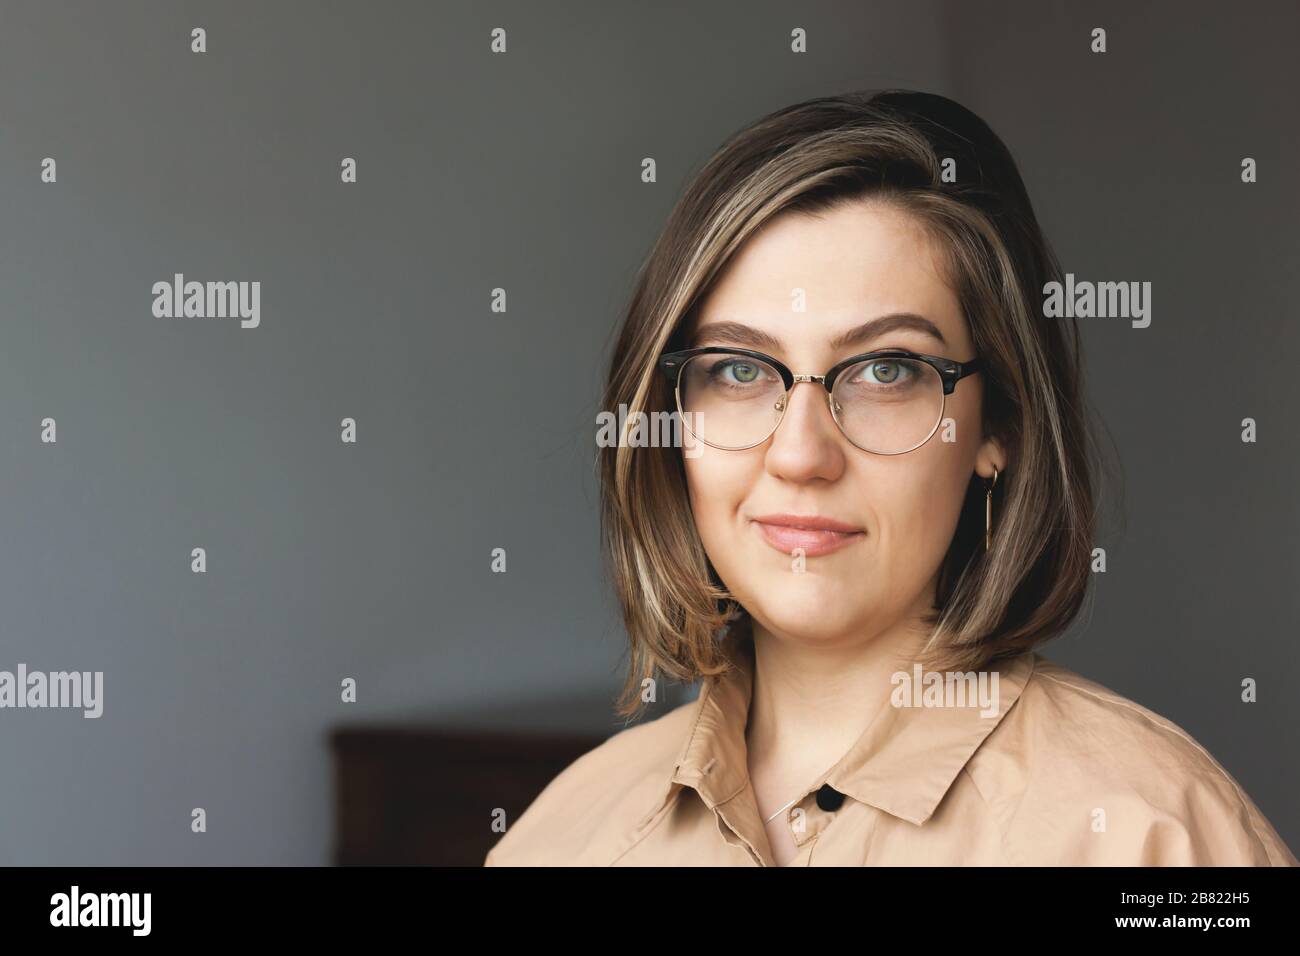 Portrait of stylish intellectual credible woman. Nice smile, glasses. The concept of a doctor, psychologist, psychiatrist, blogger, designer. Stock Photo